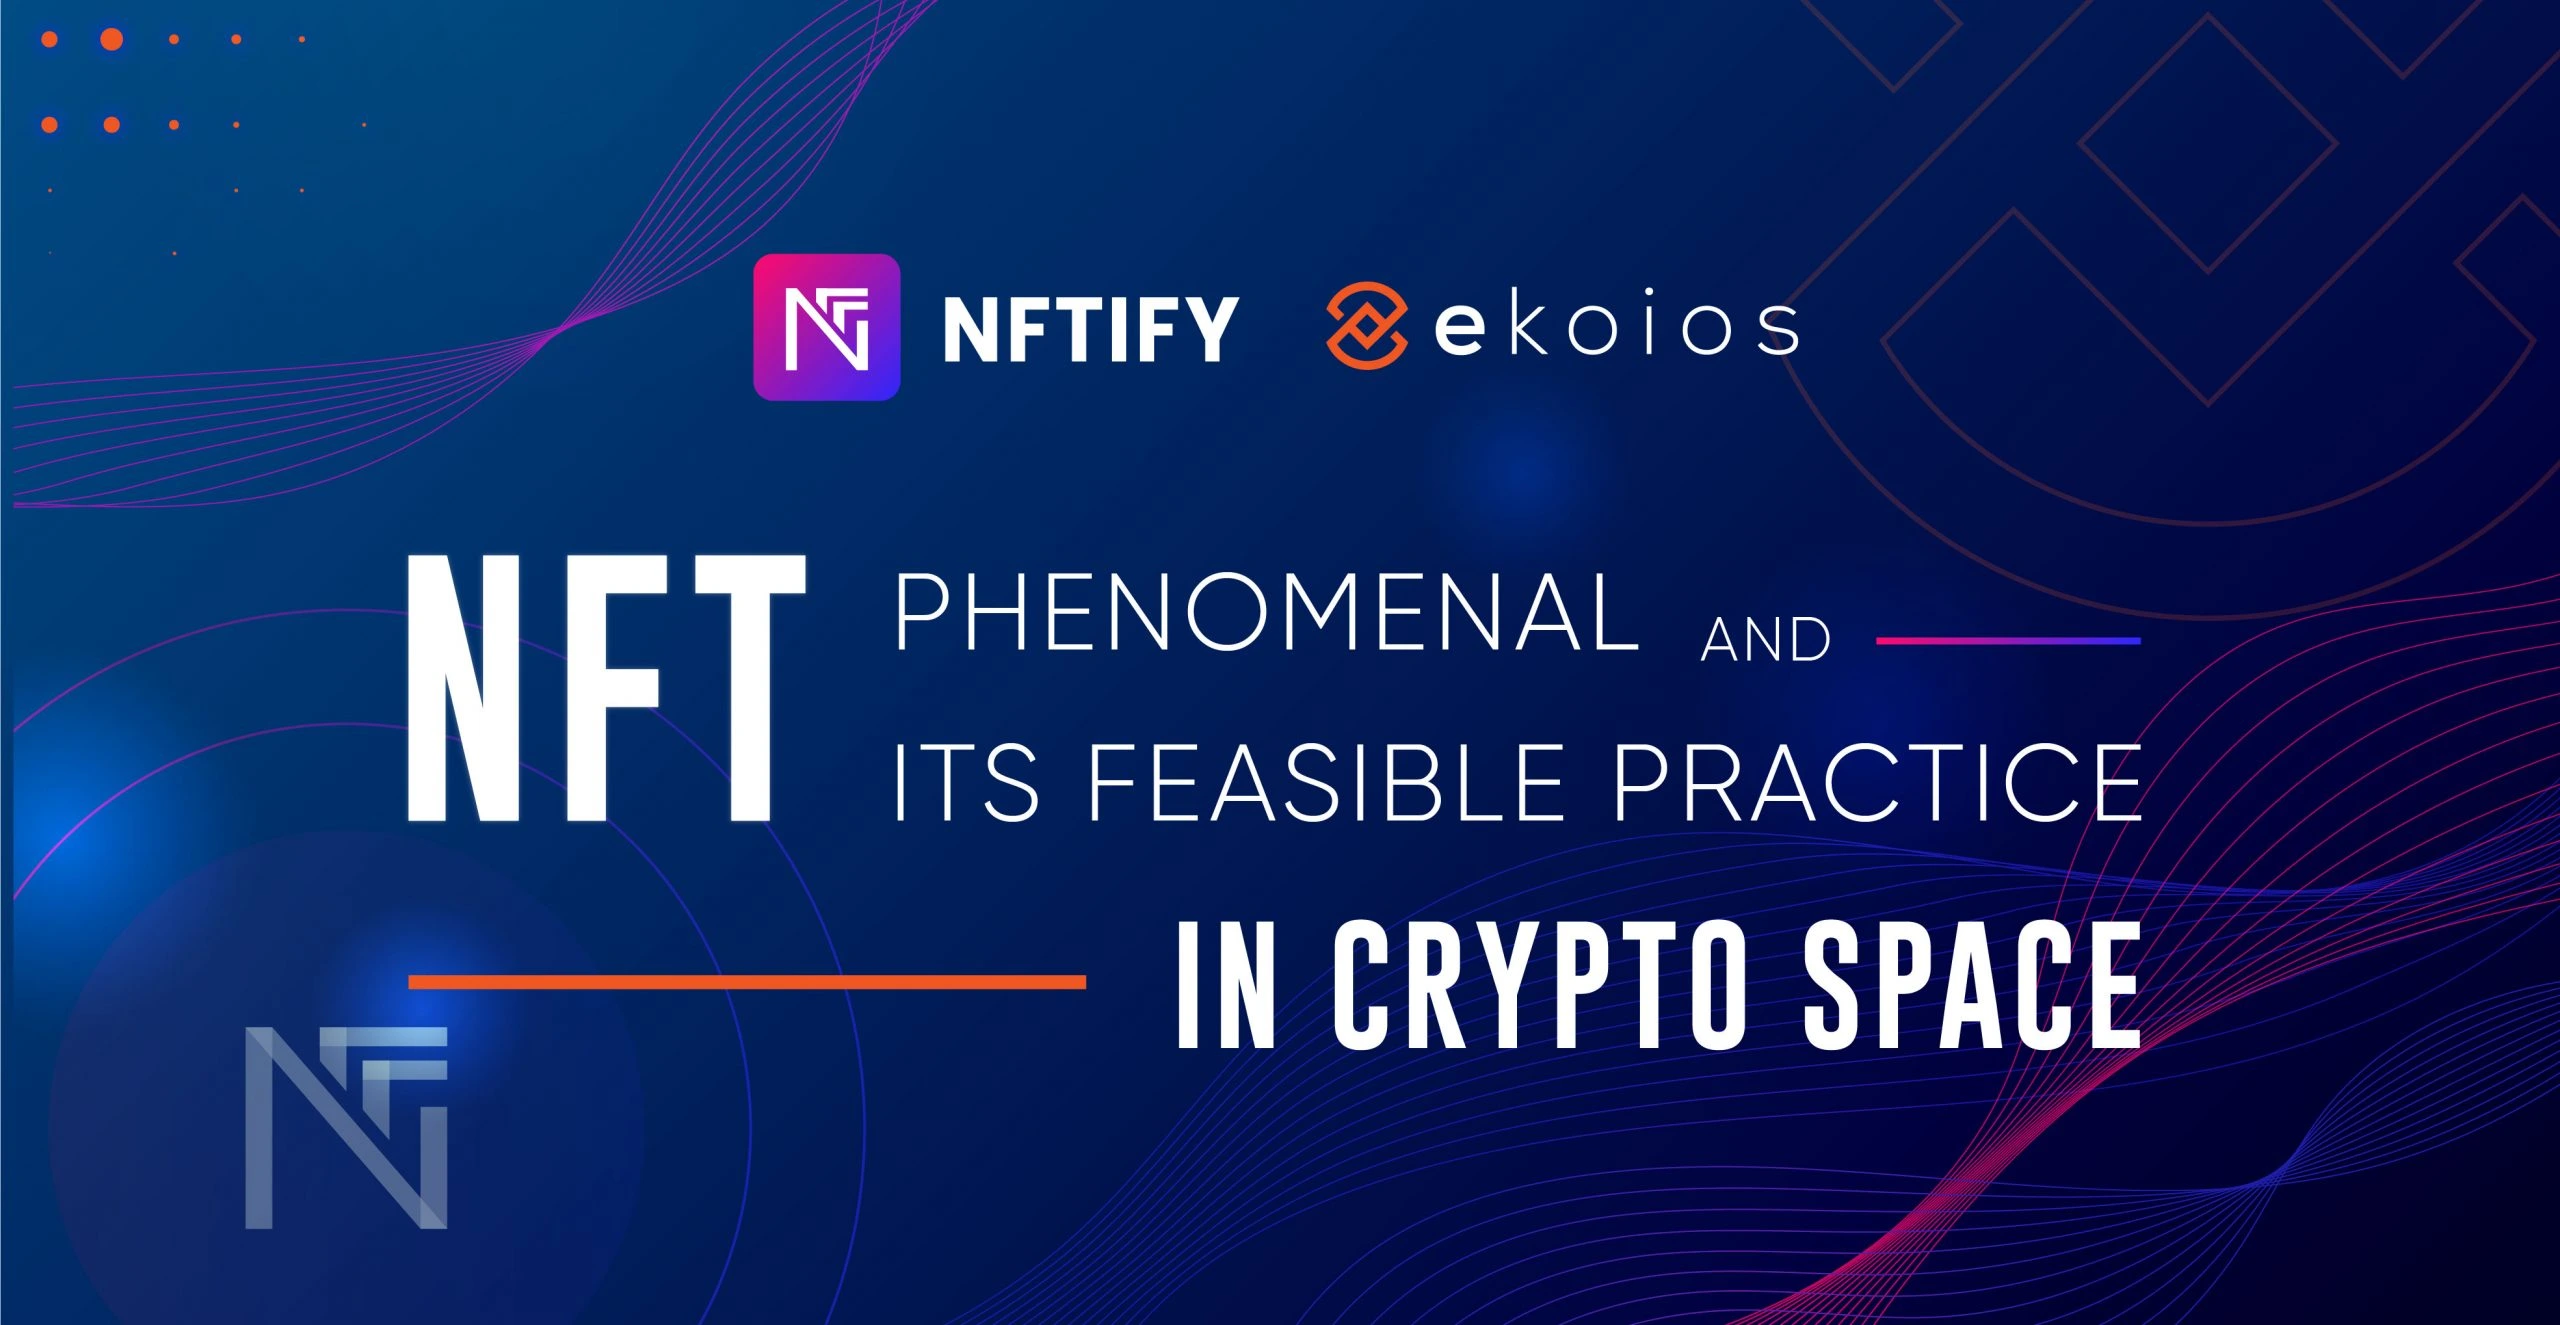 NFT Meaning And Its Feasible Practice In Crypto Space